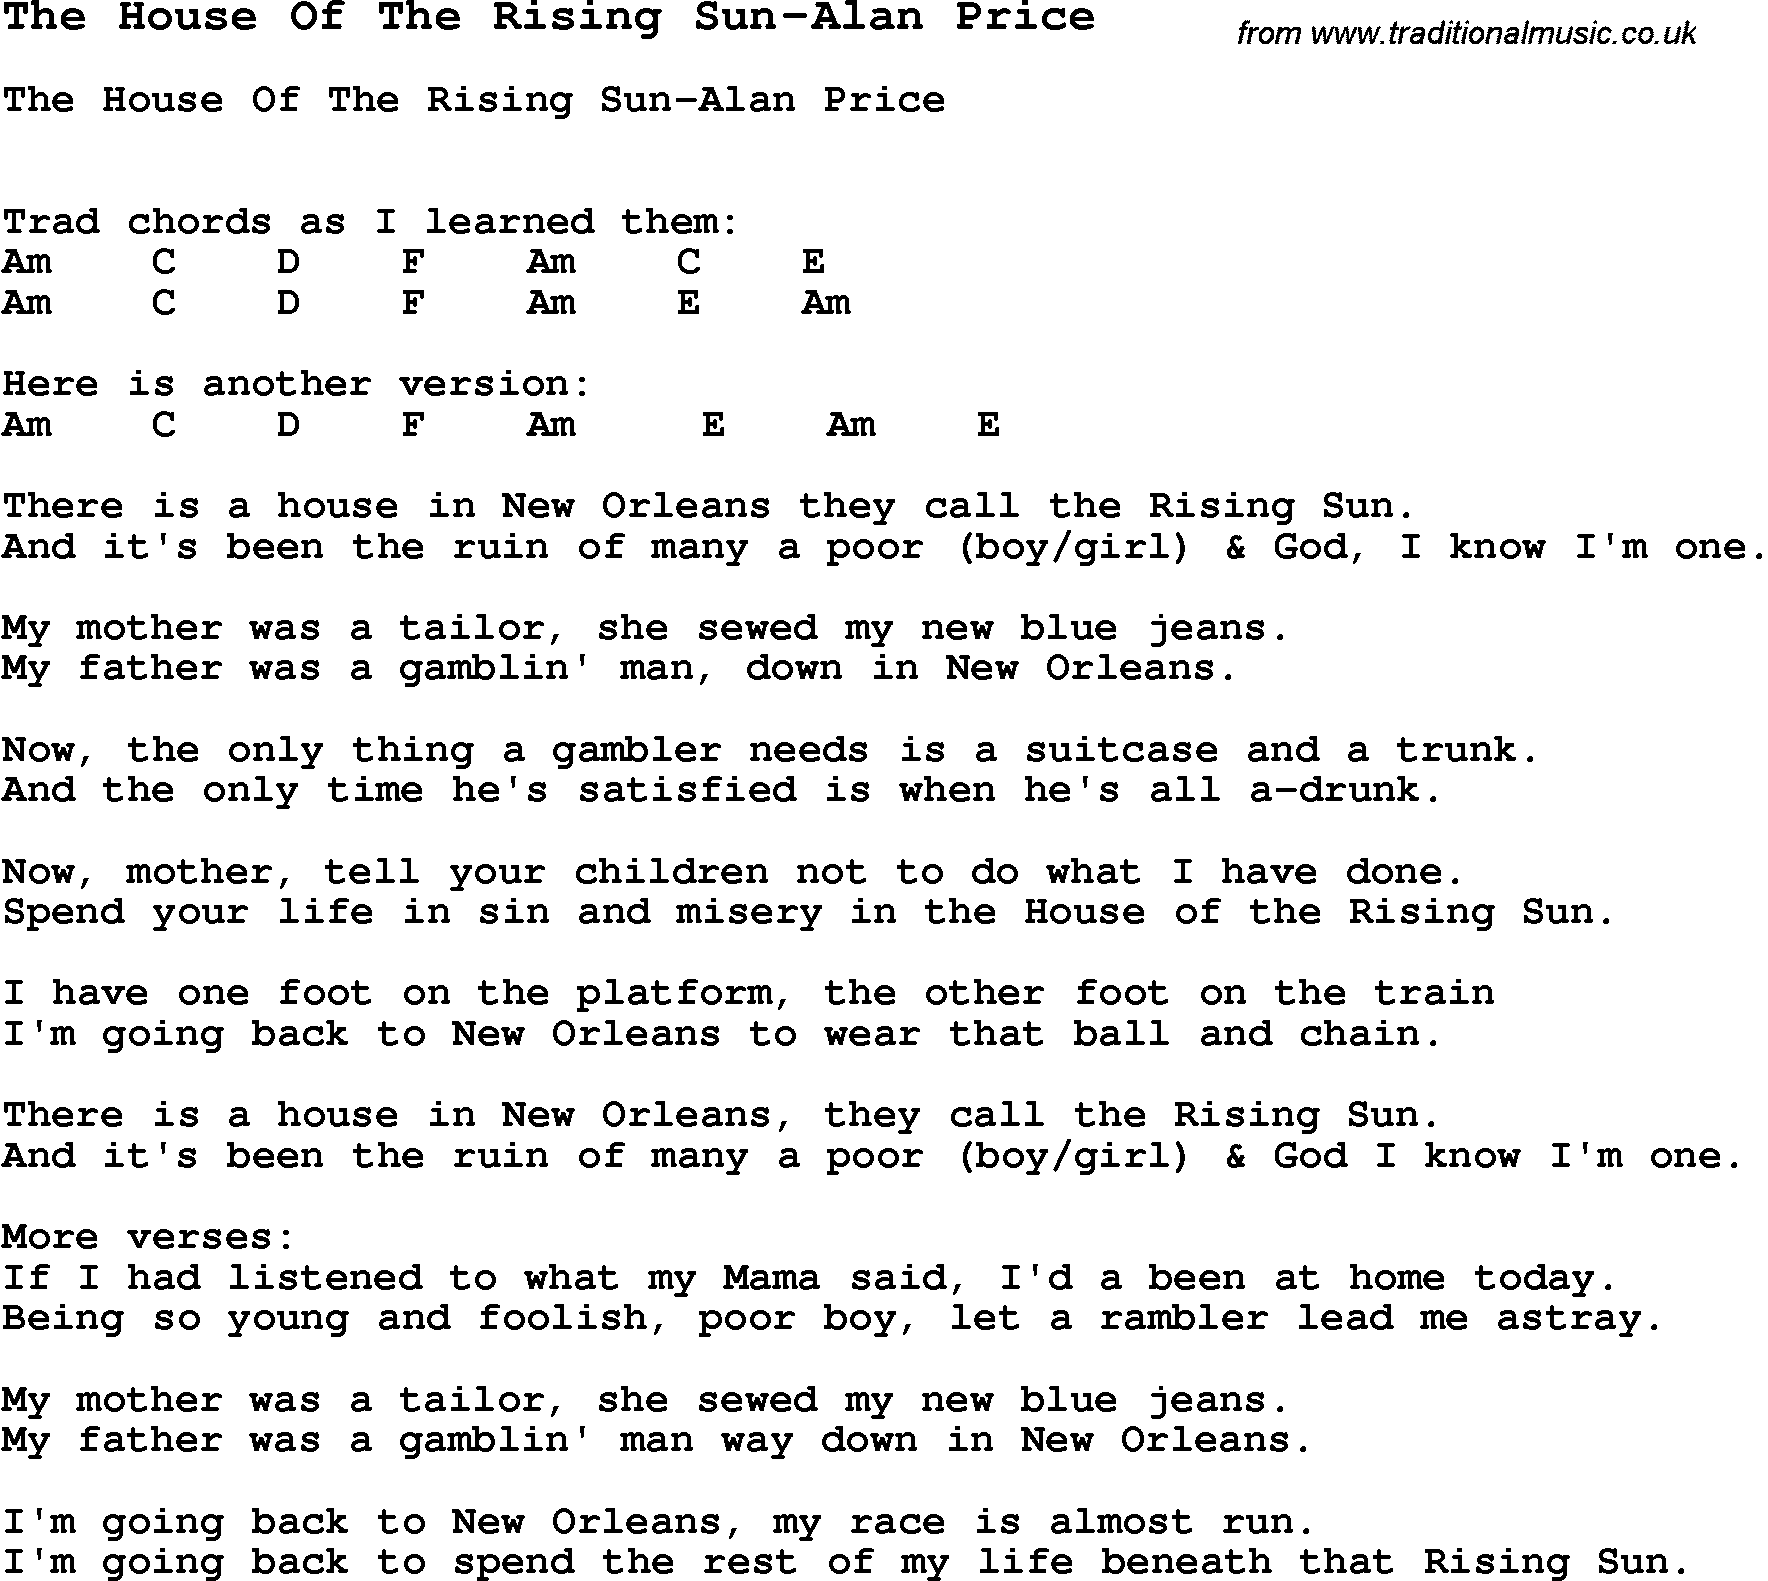 Summer-Camp Song, The House Of The Rising Sun-Alan Price, with lyrics and chords for Ukulele, Guitar Banjo etc.